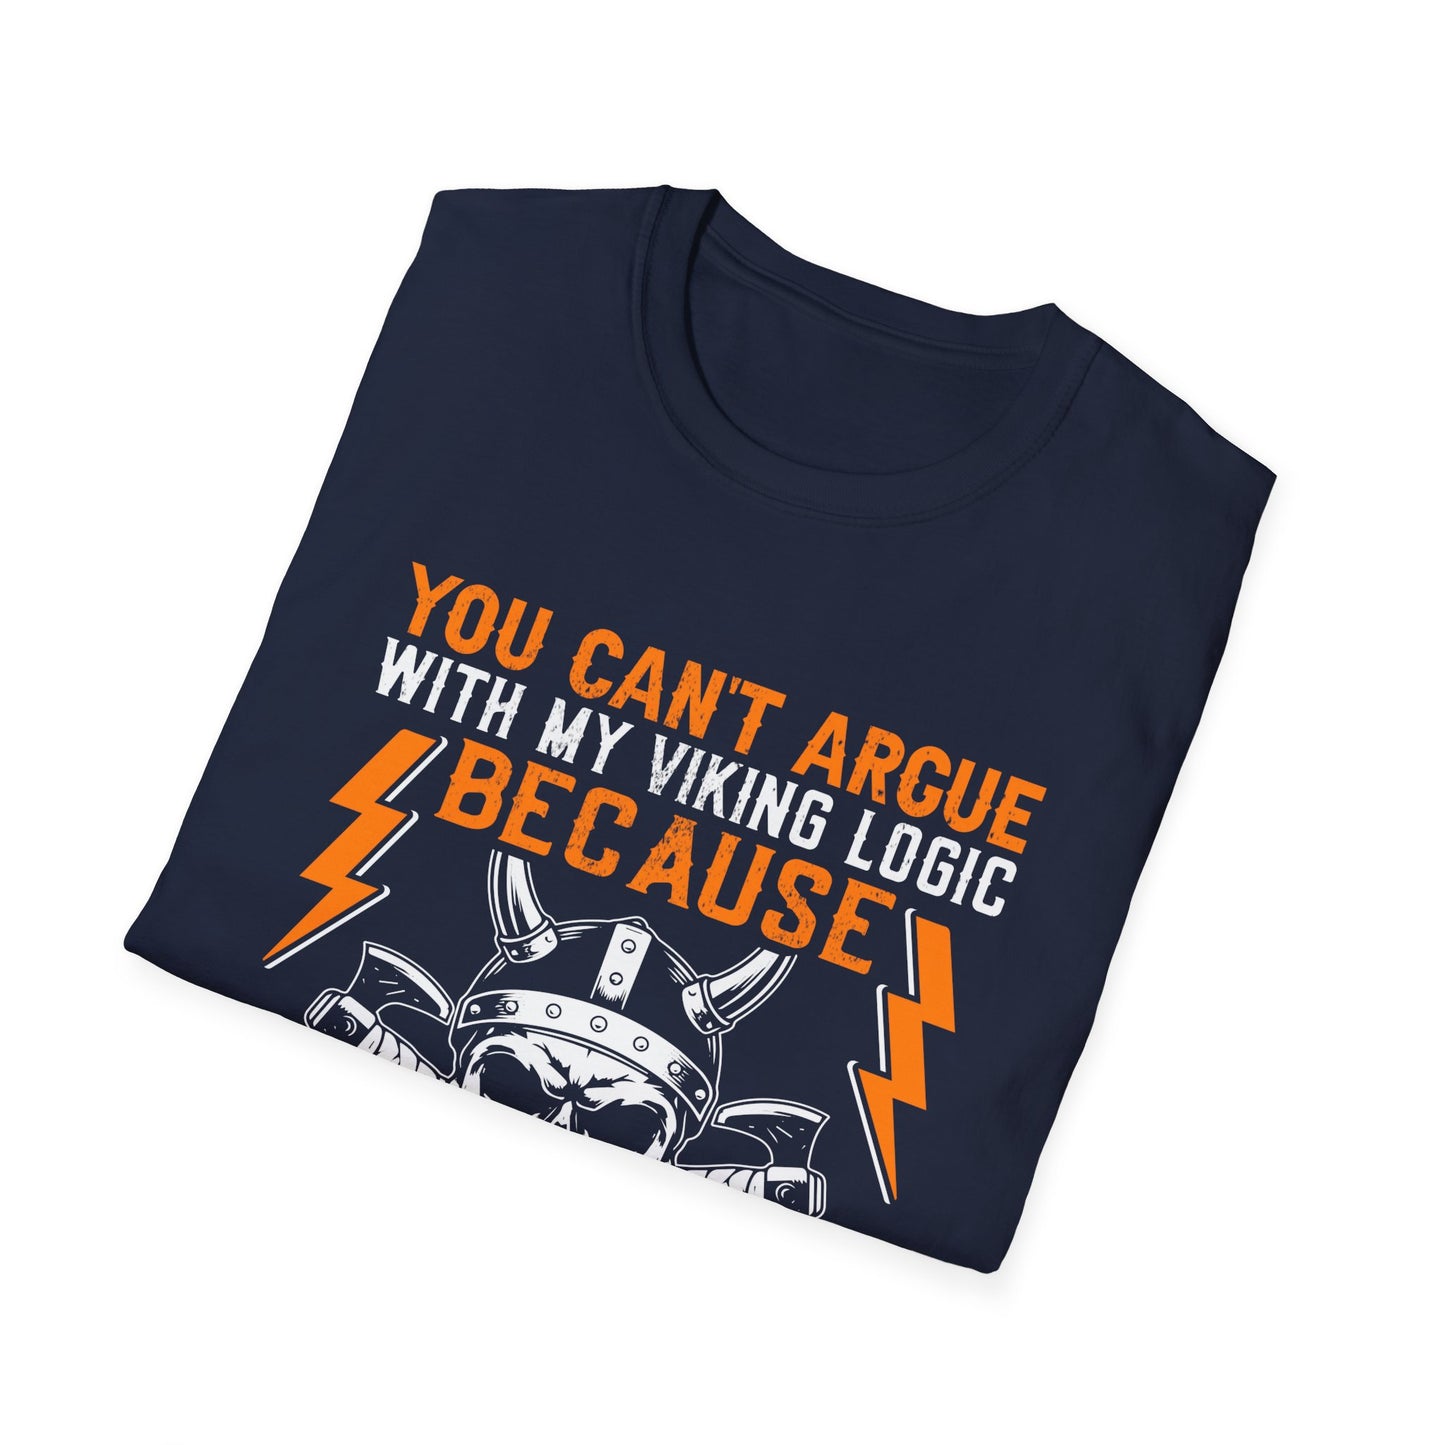 You Can't Argue With My Viking Logic Because It's Usually Backed Up With An Axe T-Shirt